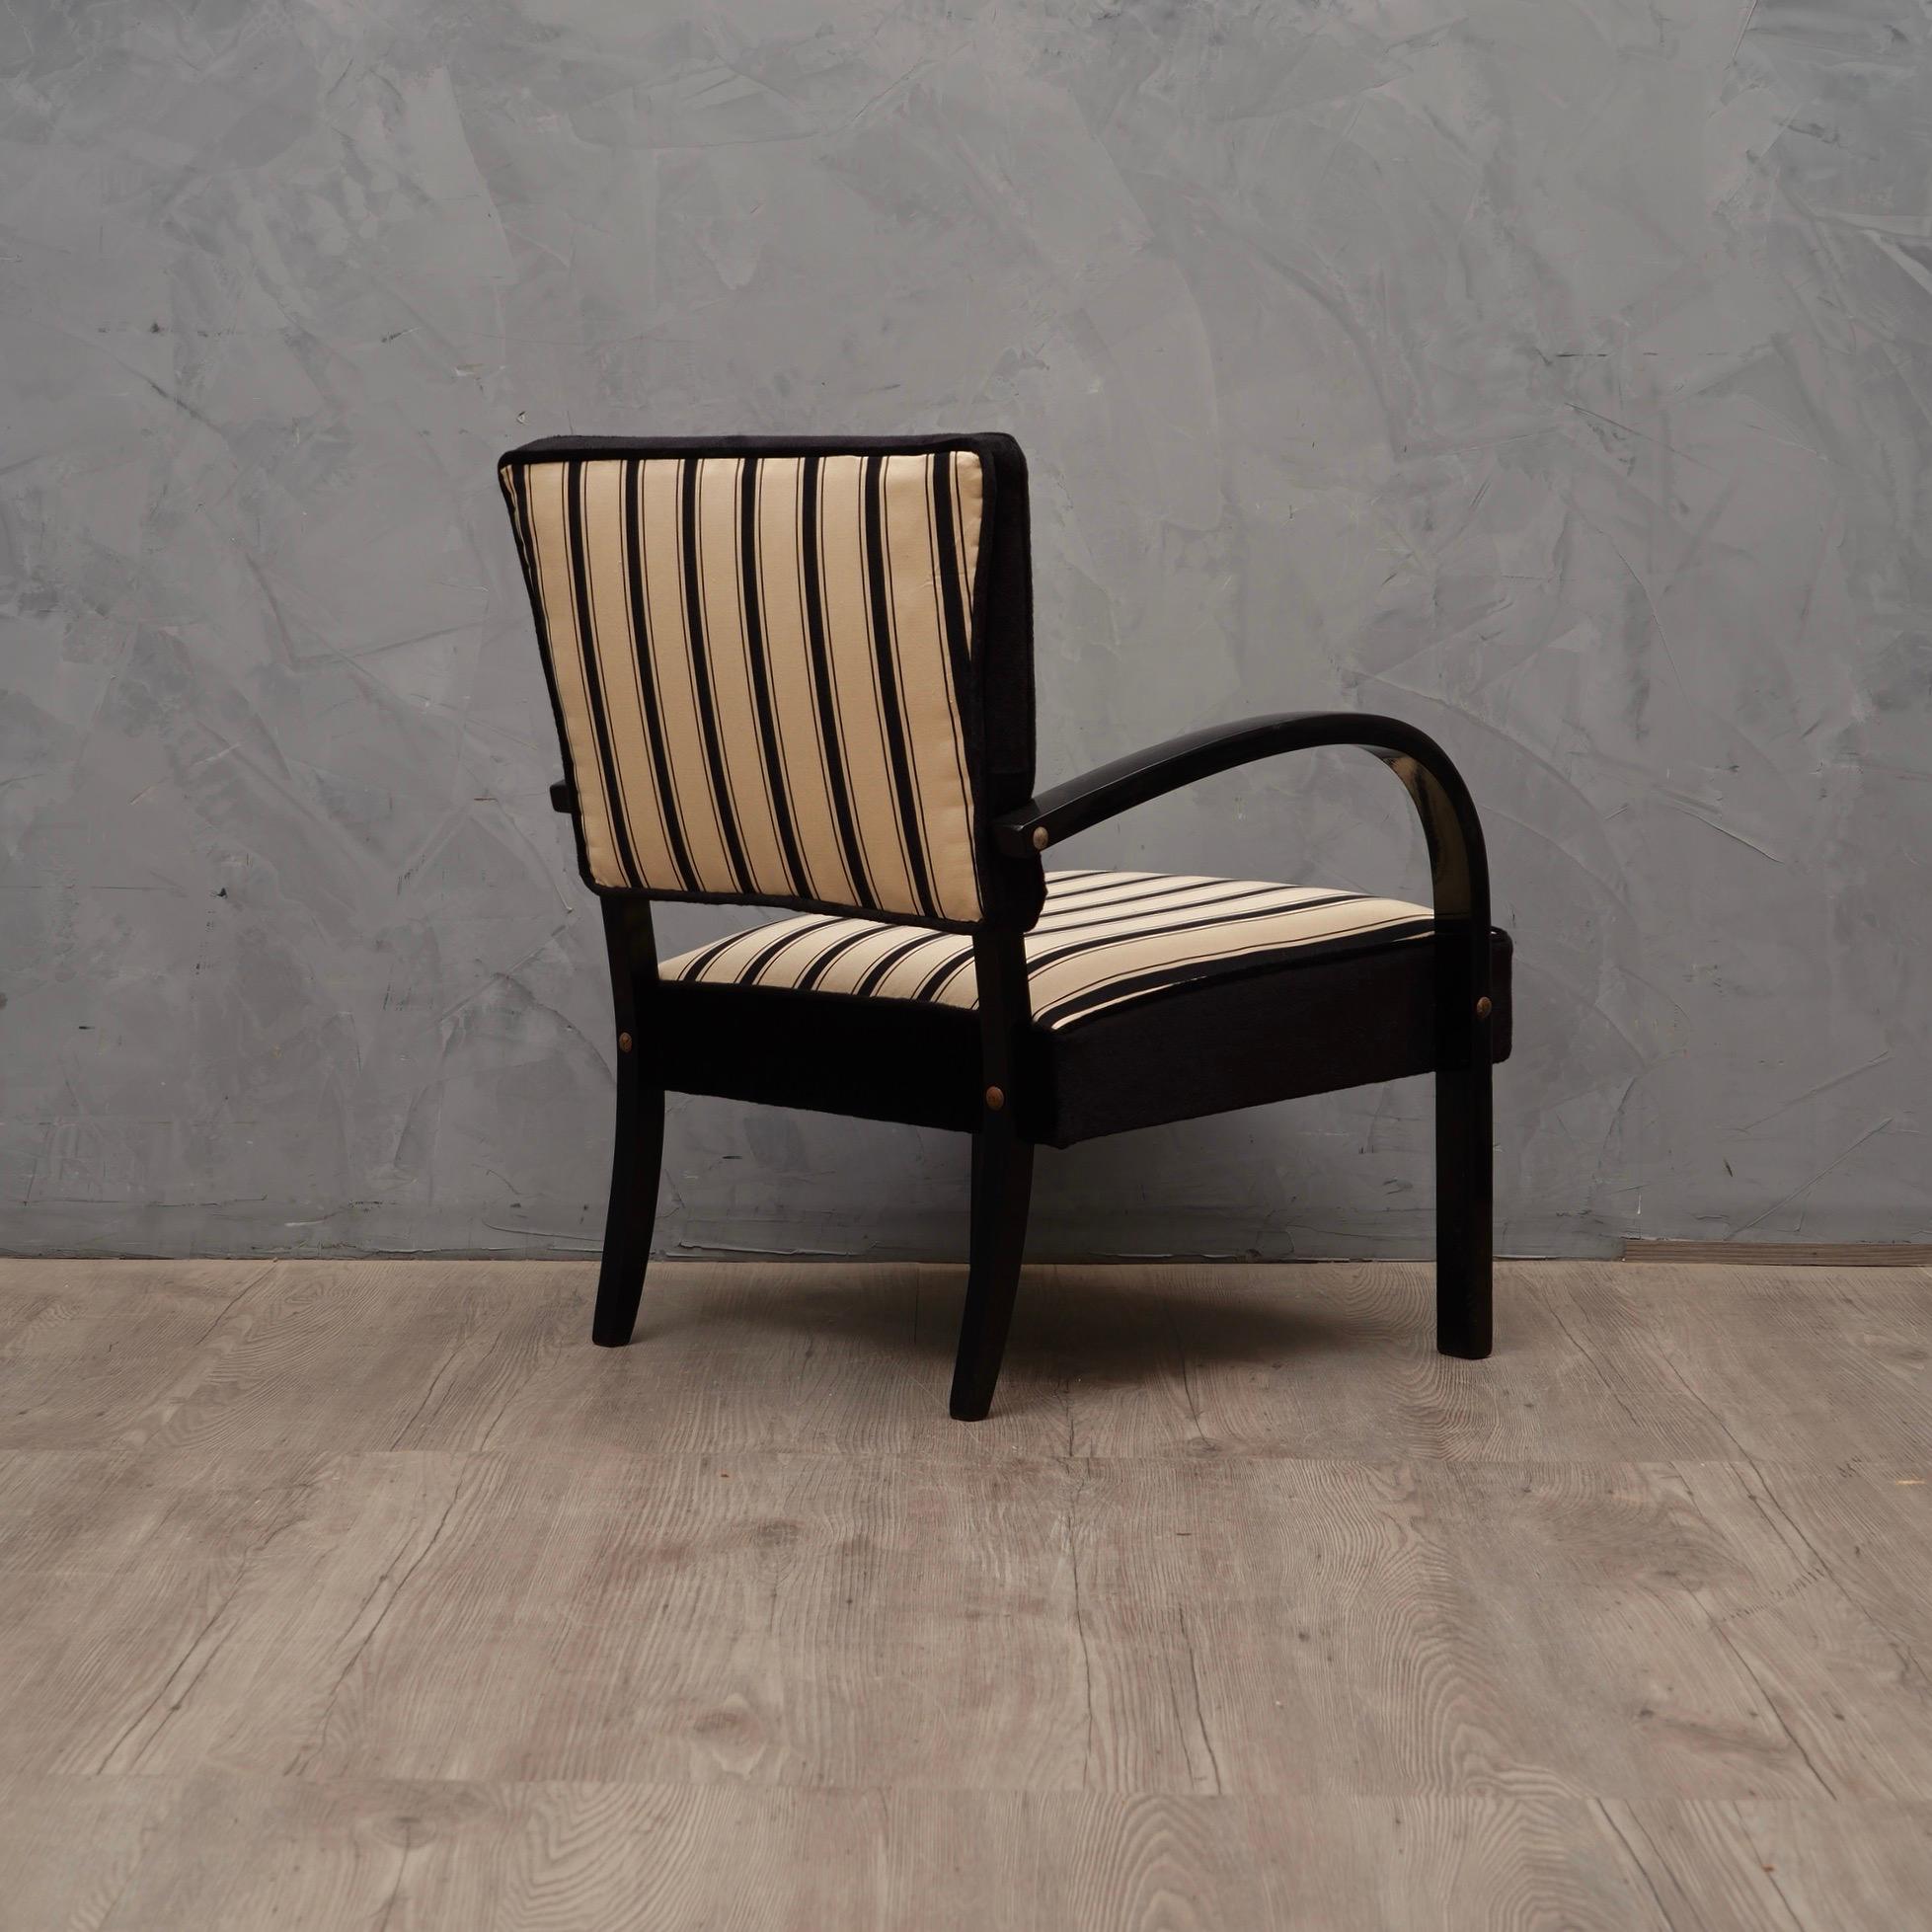 black and white striped armchair